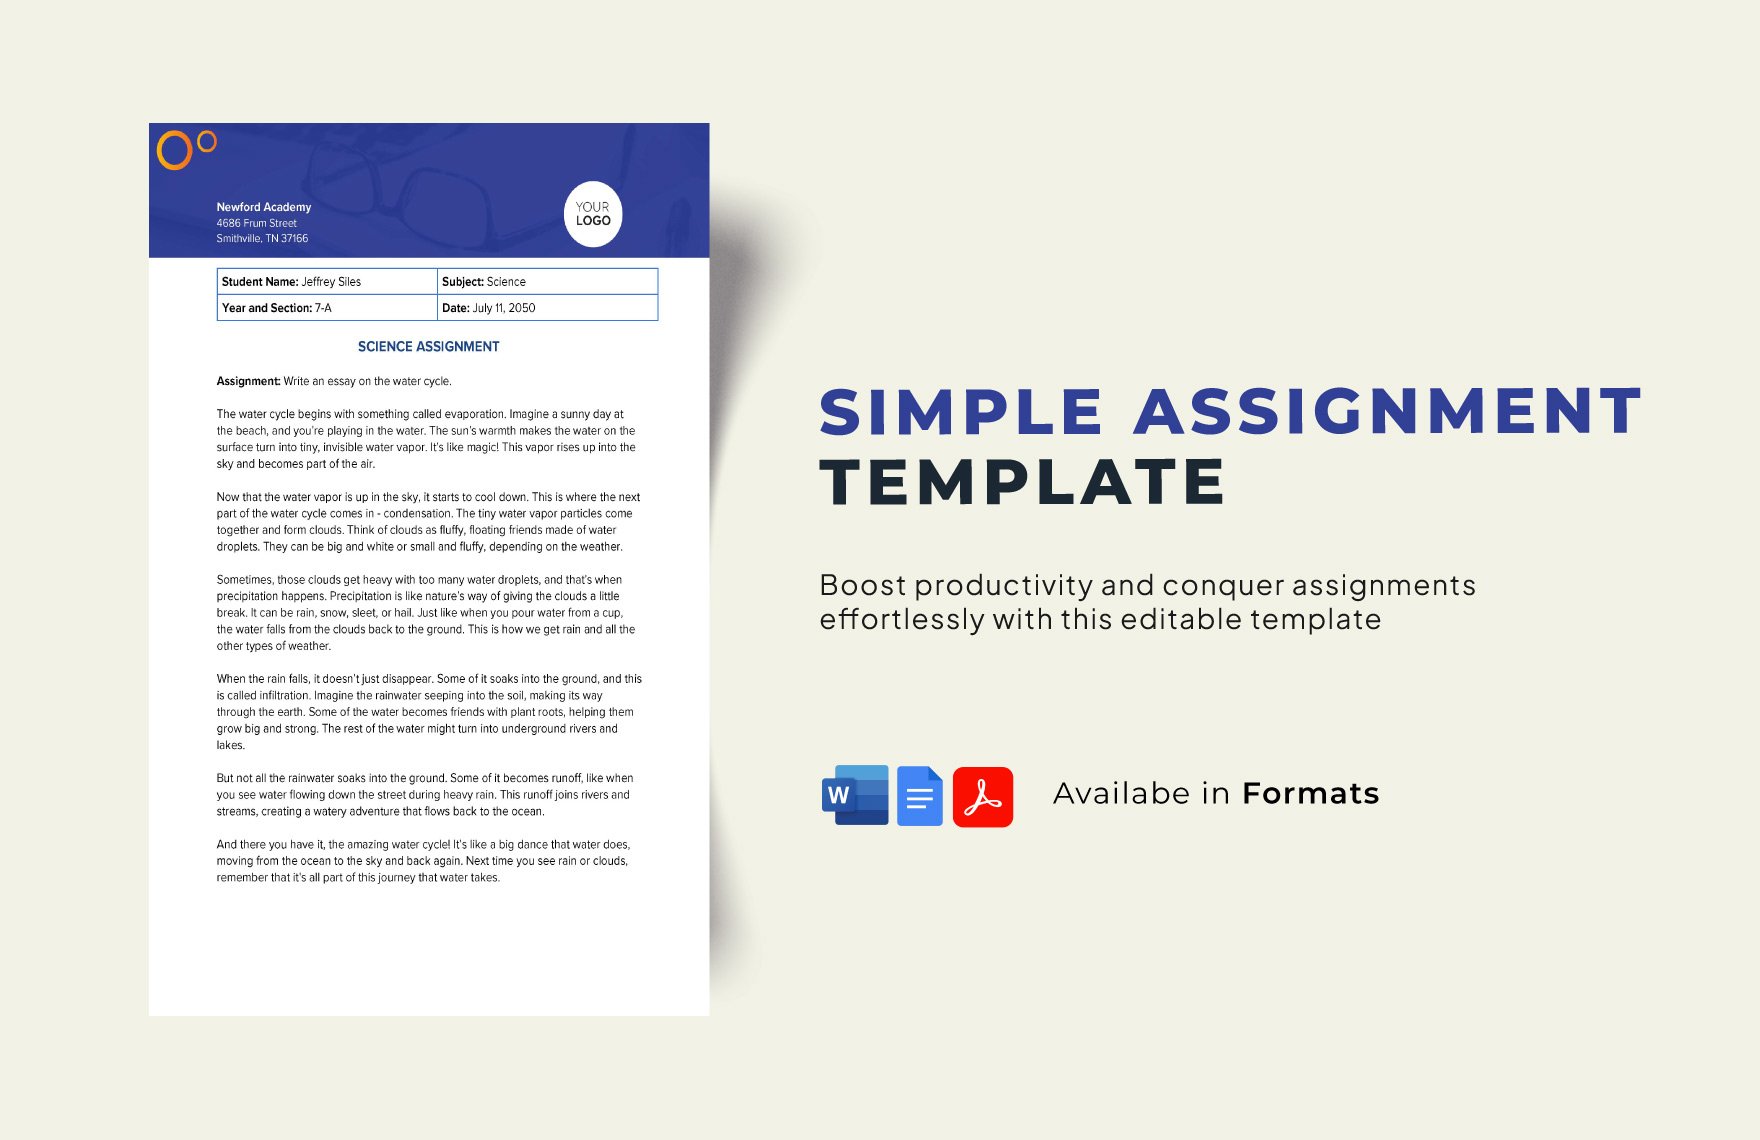 Simple Assignment Template